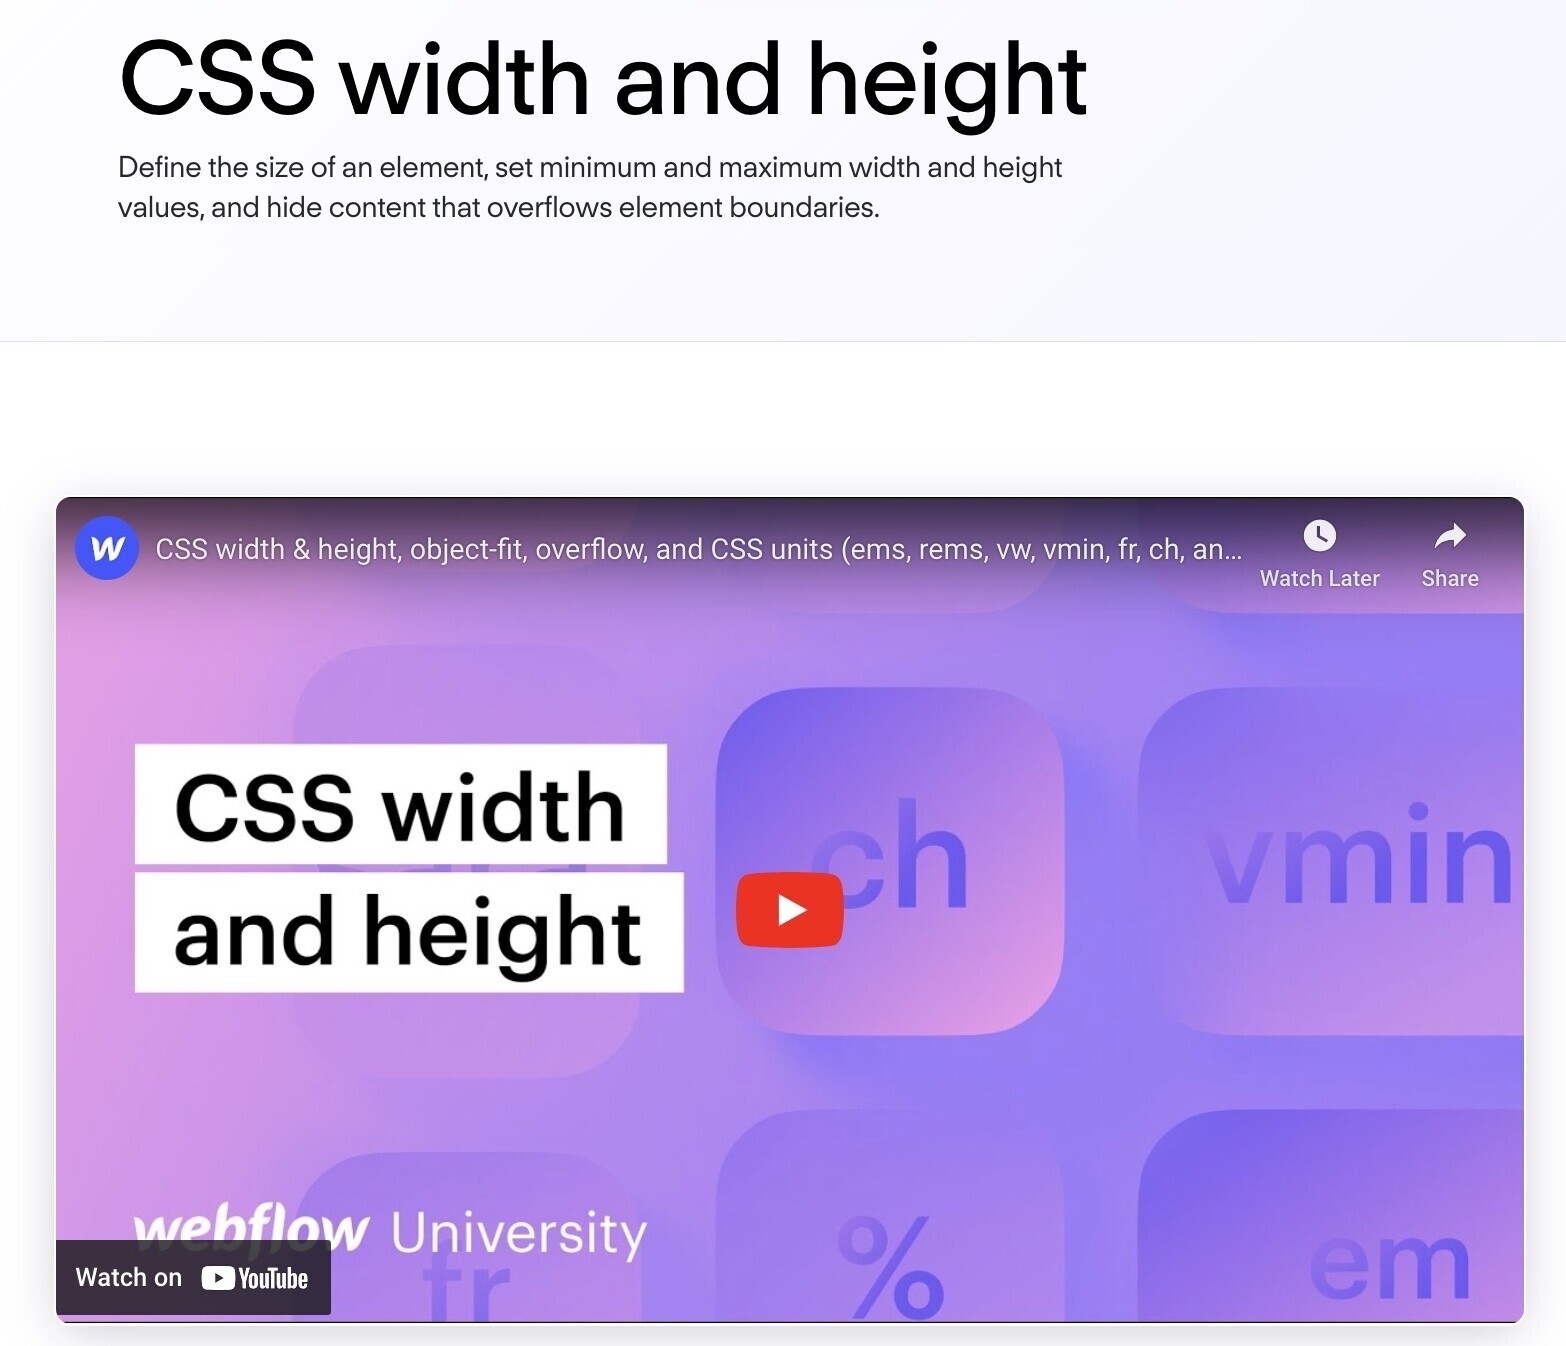 "CSS width and height" lesson on Webflow University